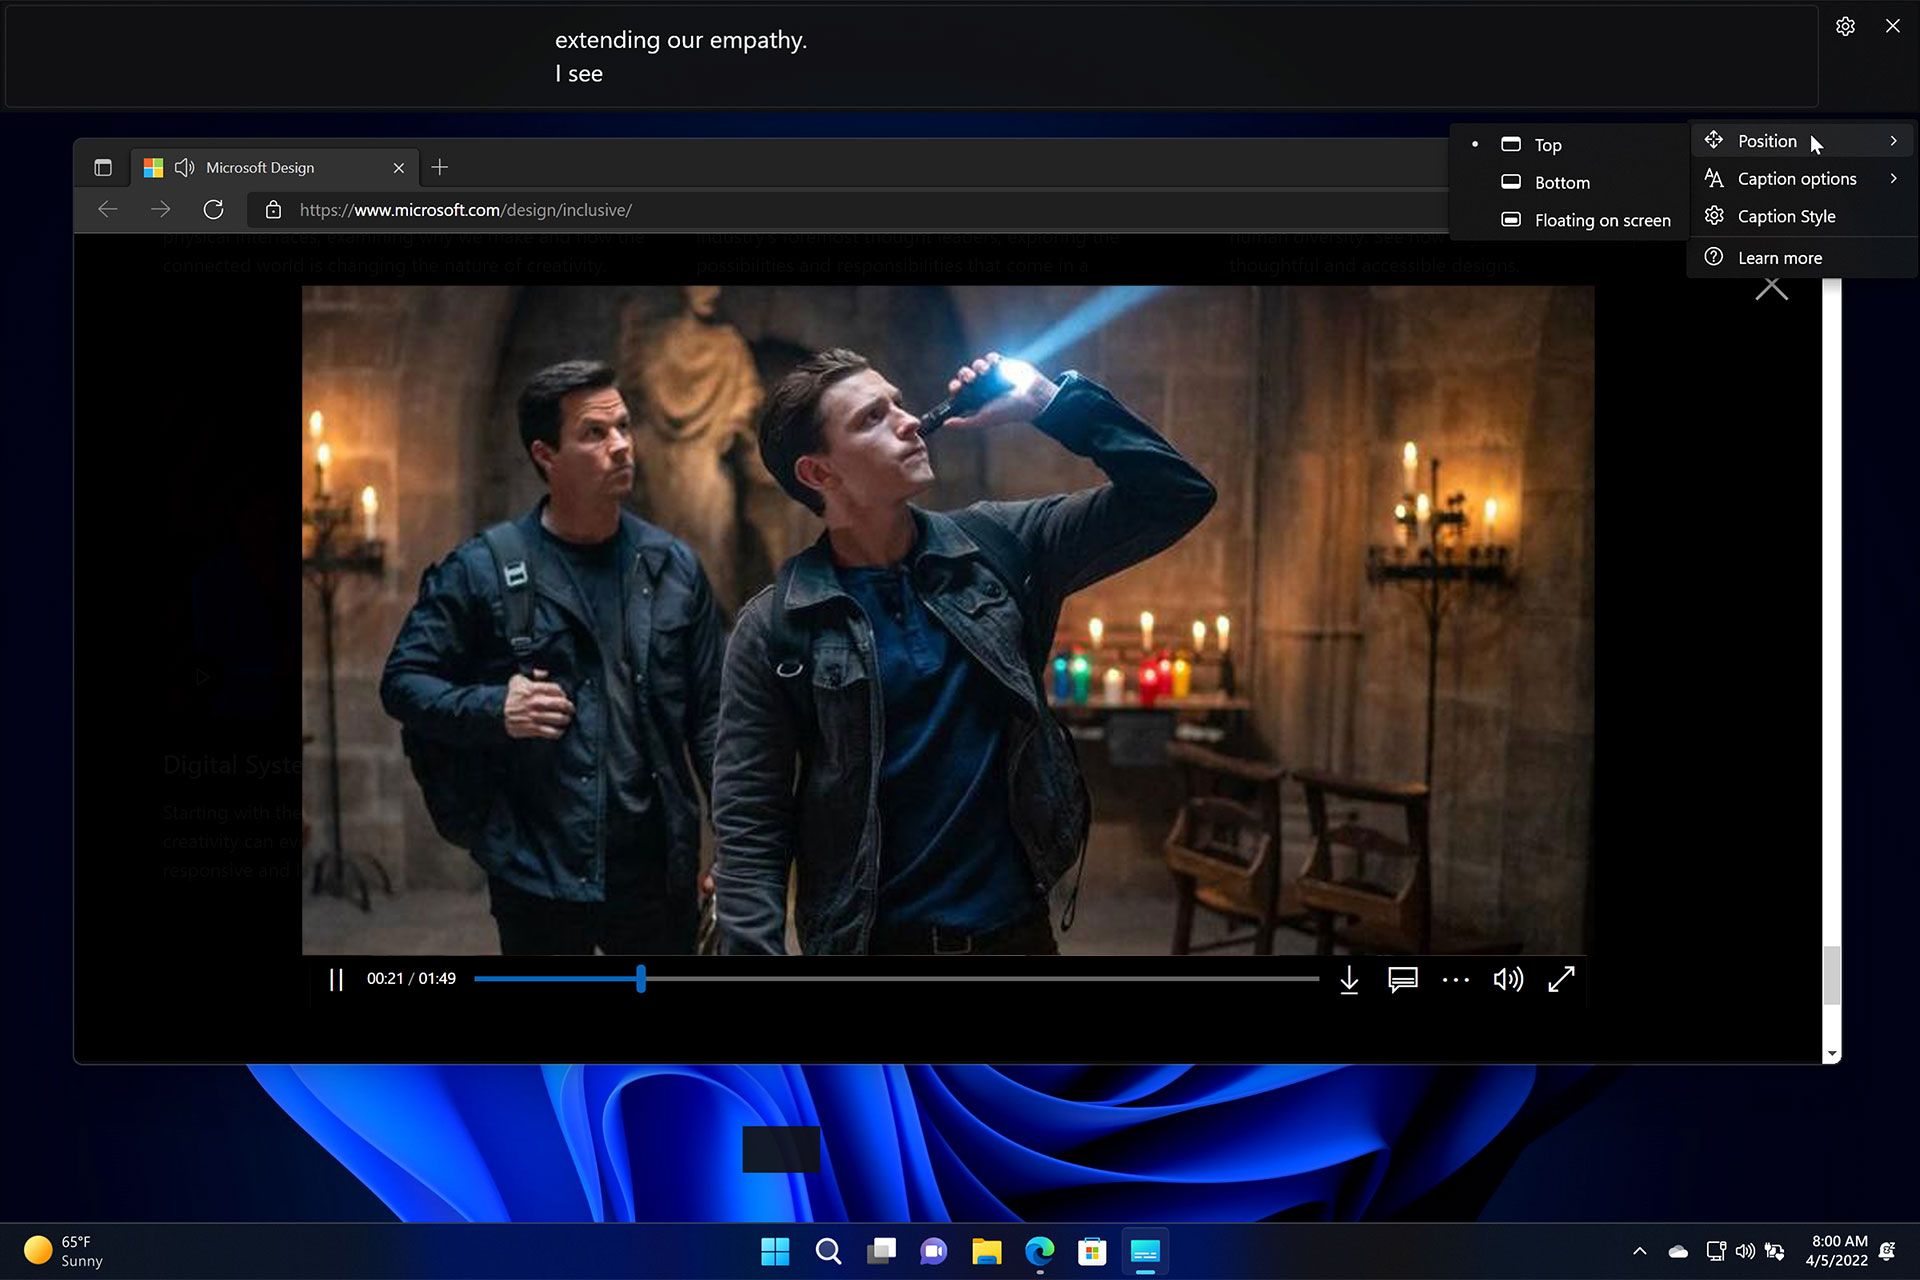 Improved live caption capability in Windows 11